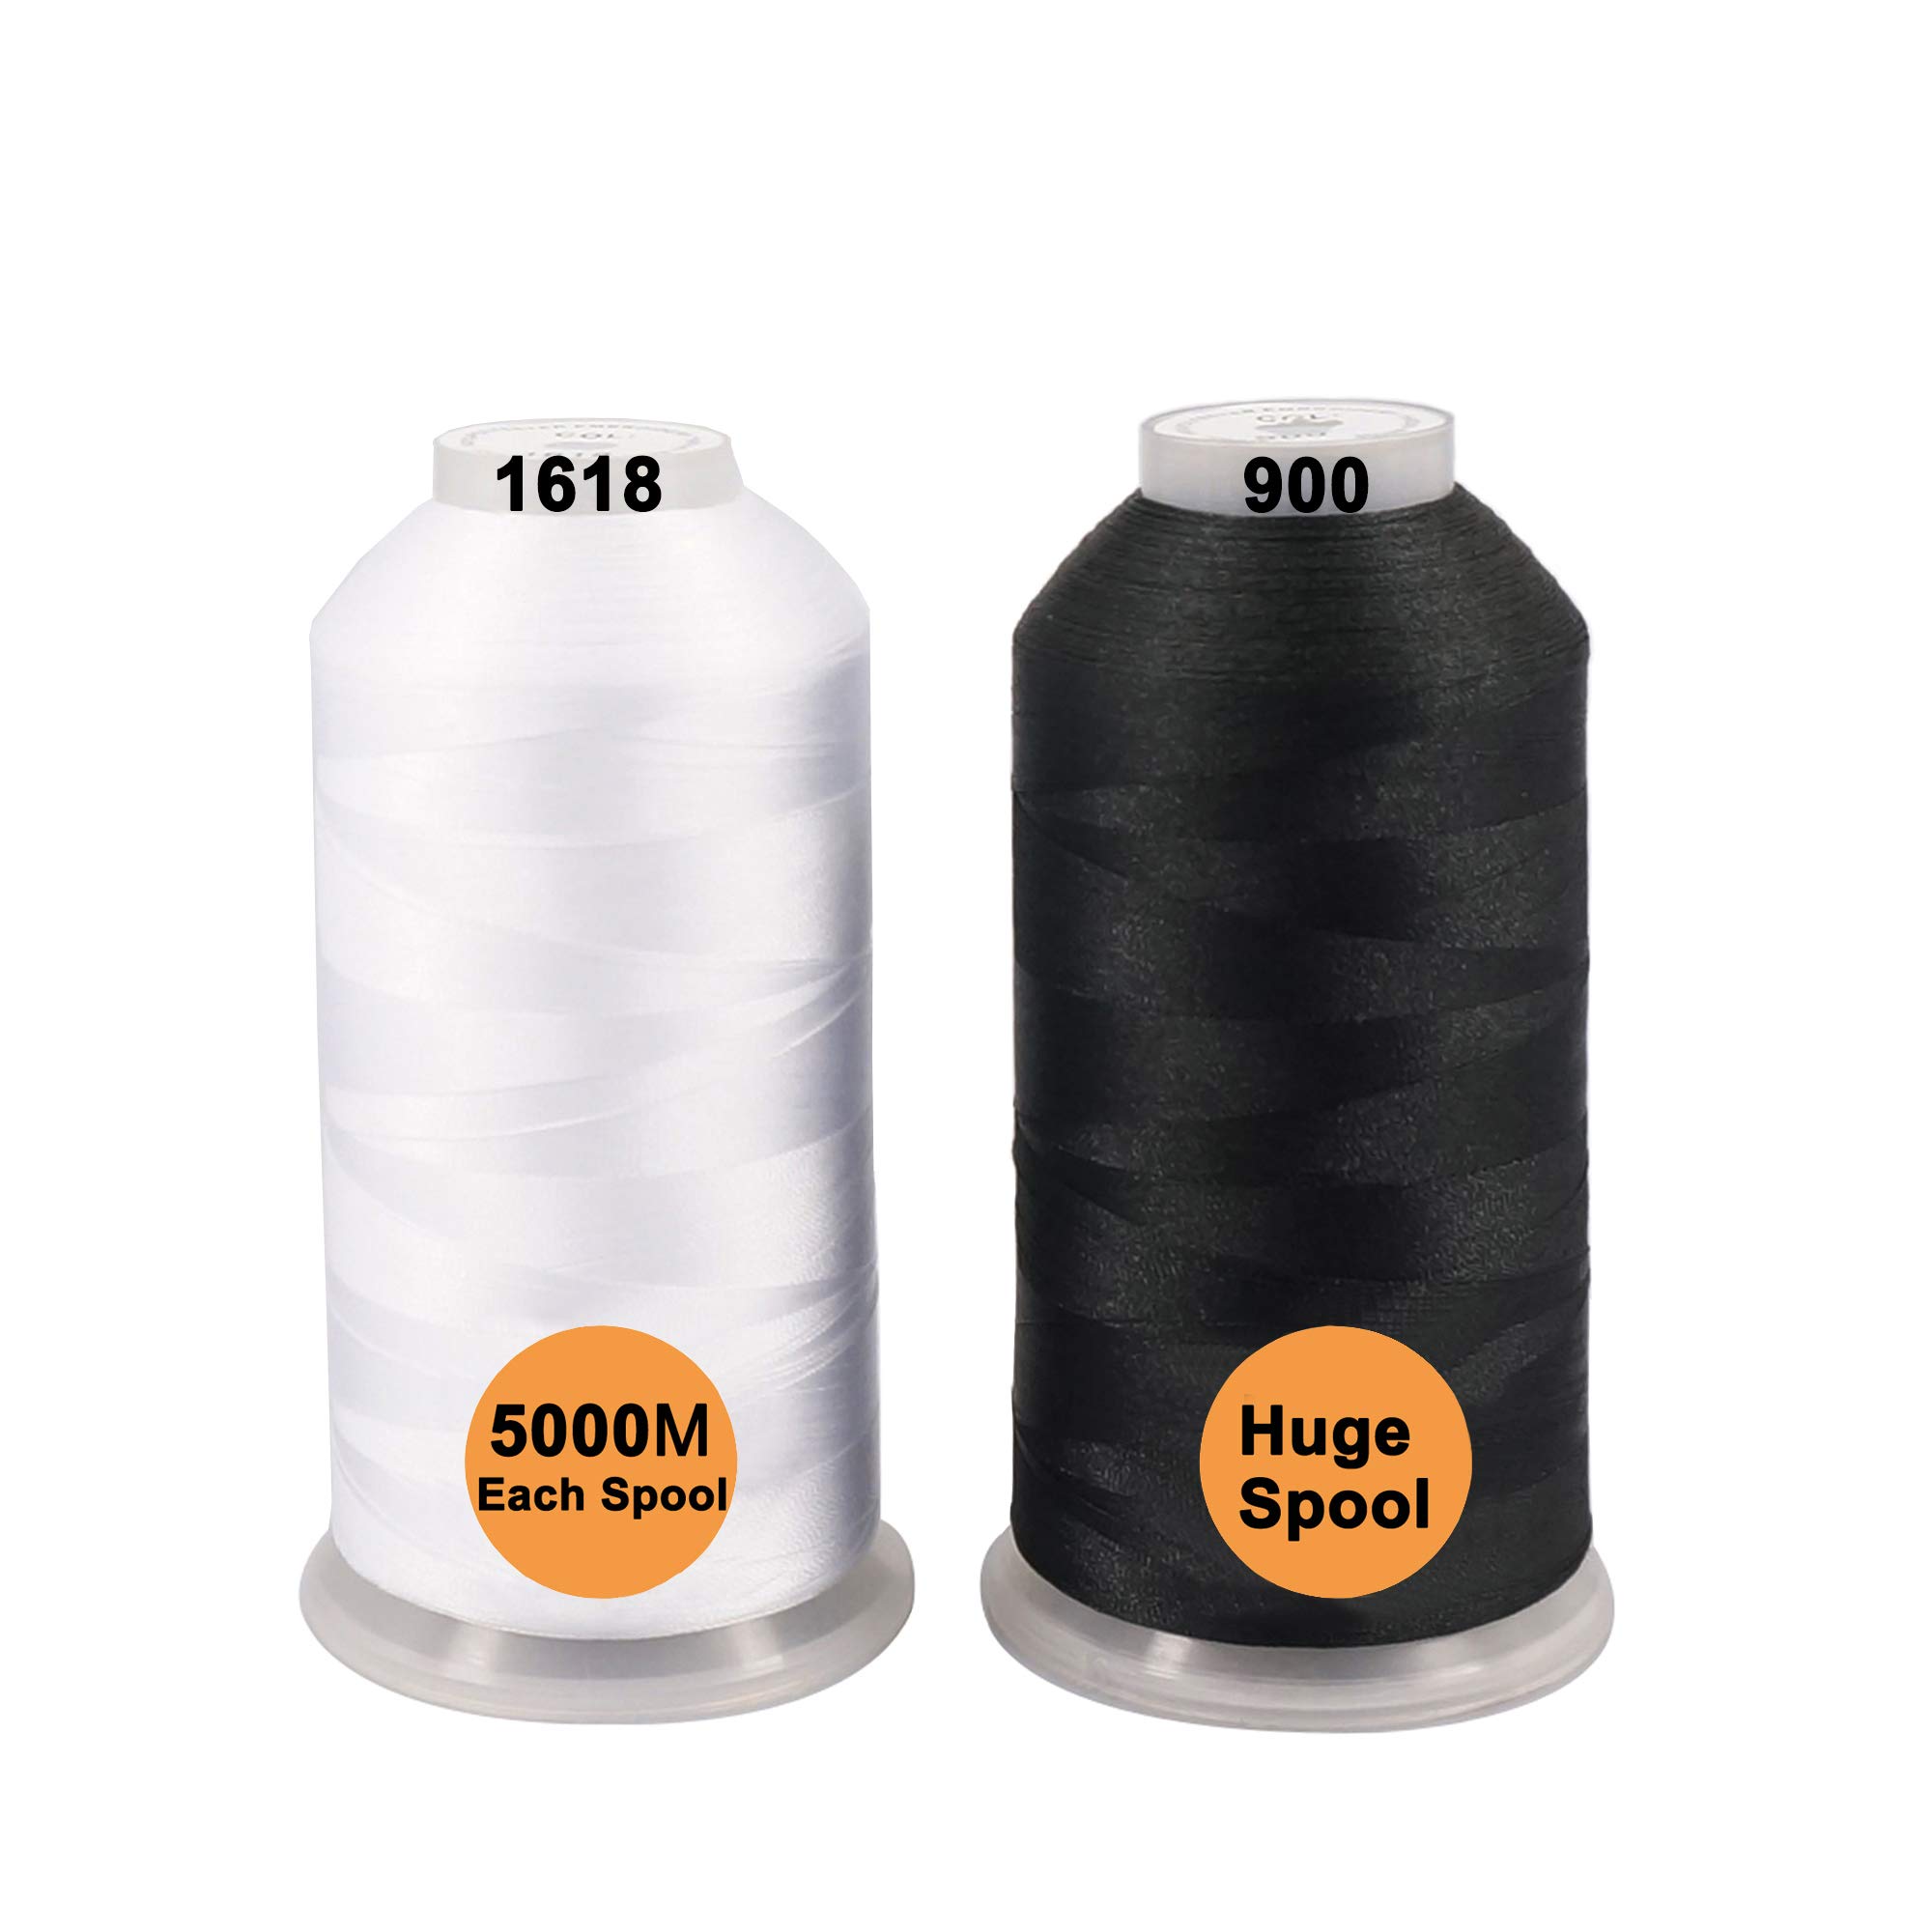 New brothreads - 32 Options- Various Assorted Color Packs of Polyester Embroidery  Machine Thread Huge Spool 5000M for All Embroidery Machines -1Black+1White